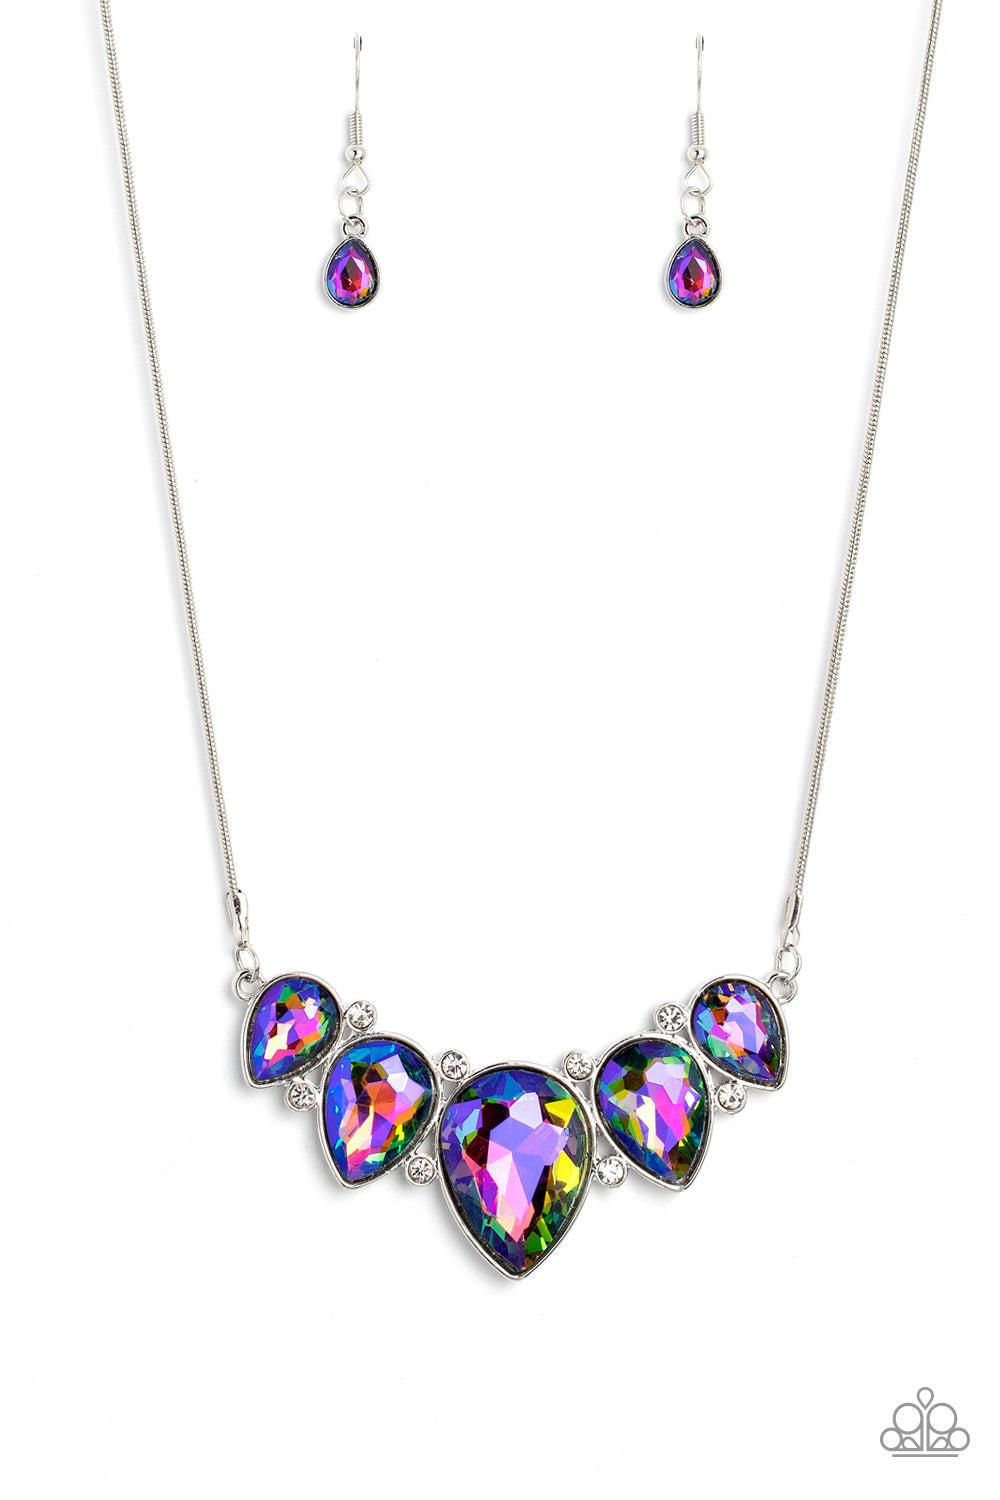 Regally Refined Multi Oil Spill Rhinestone Necklace - Paparazzi Accessories- lightbox - CarasShop.com - $5 Jewelry by Cara Jewels